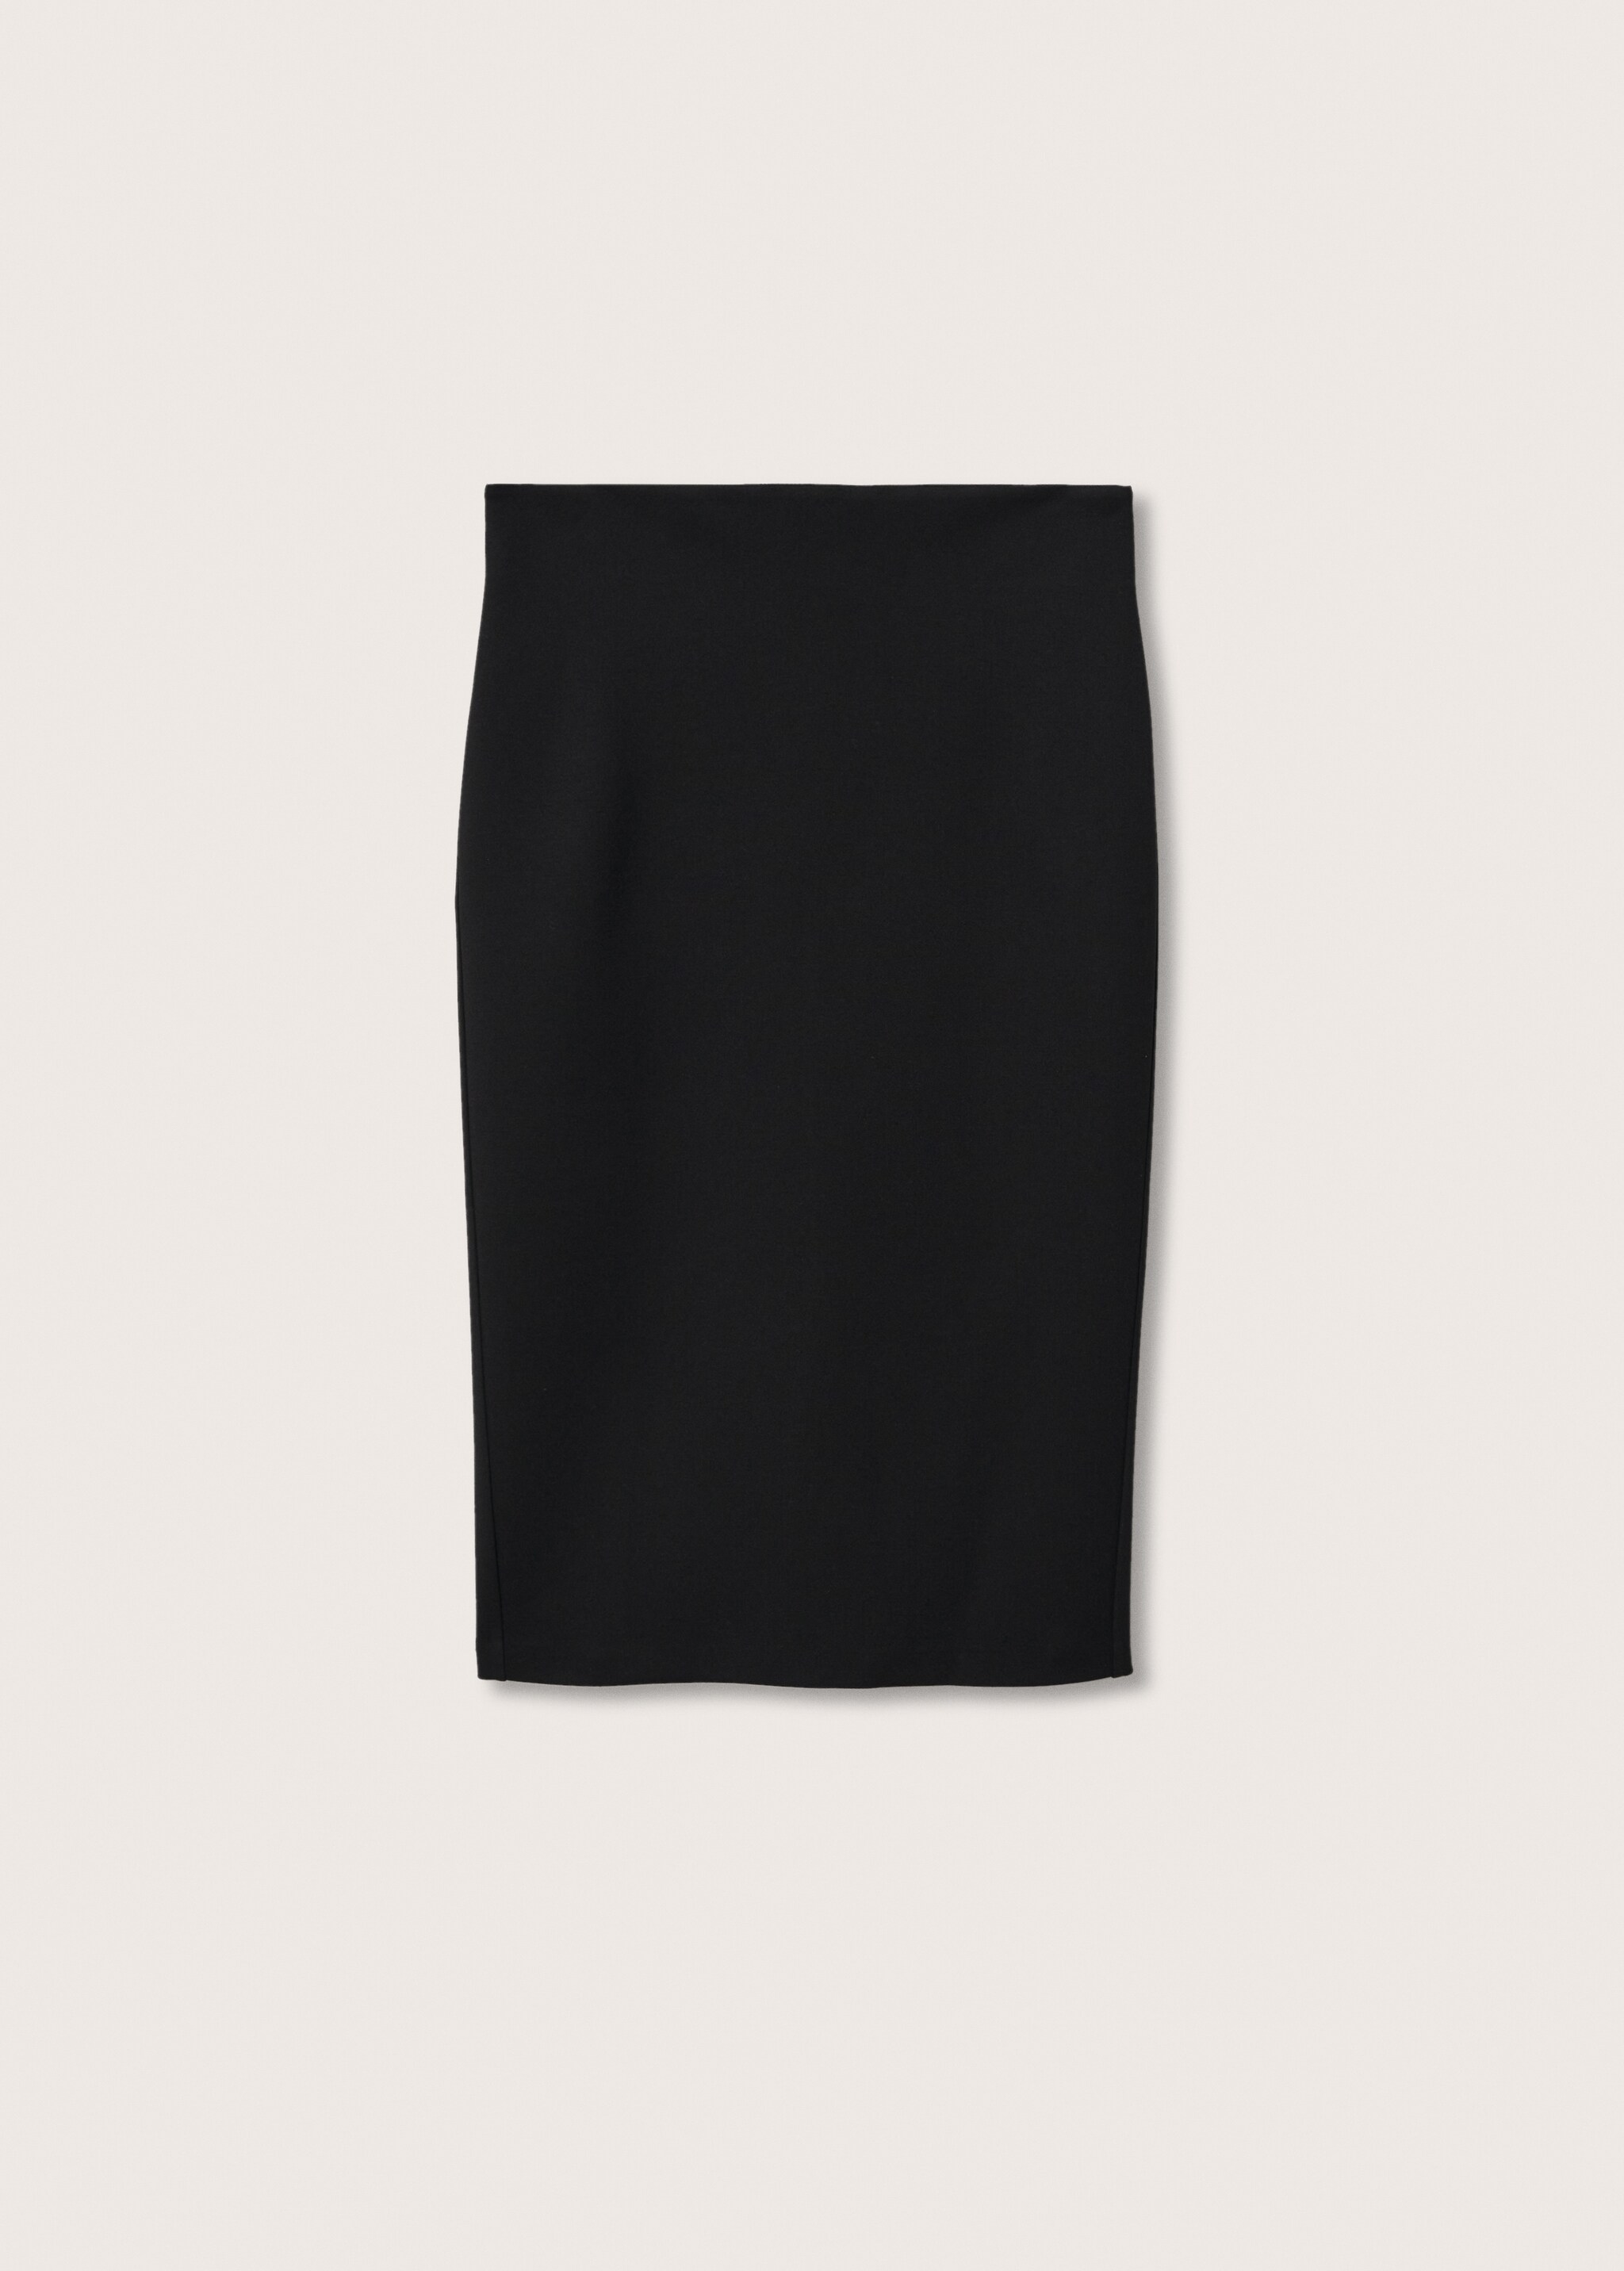 Opening pencil skirt - Article without model